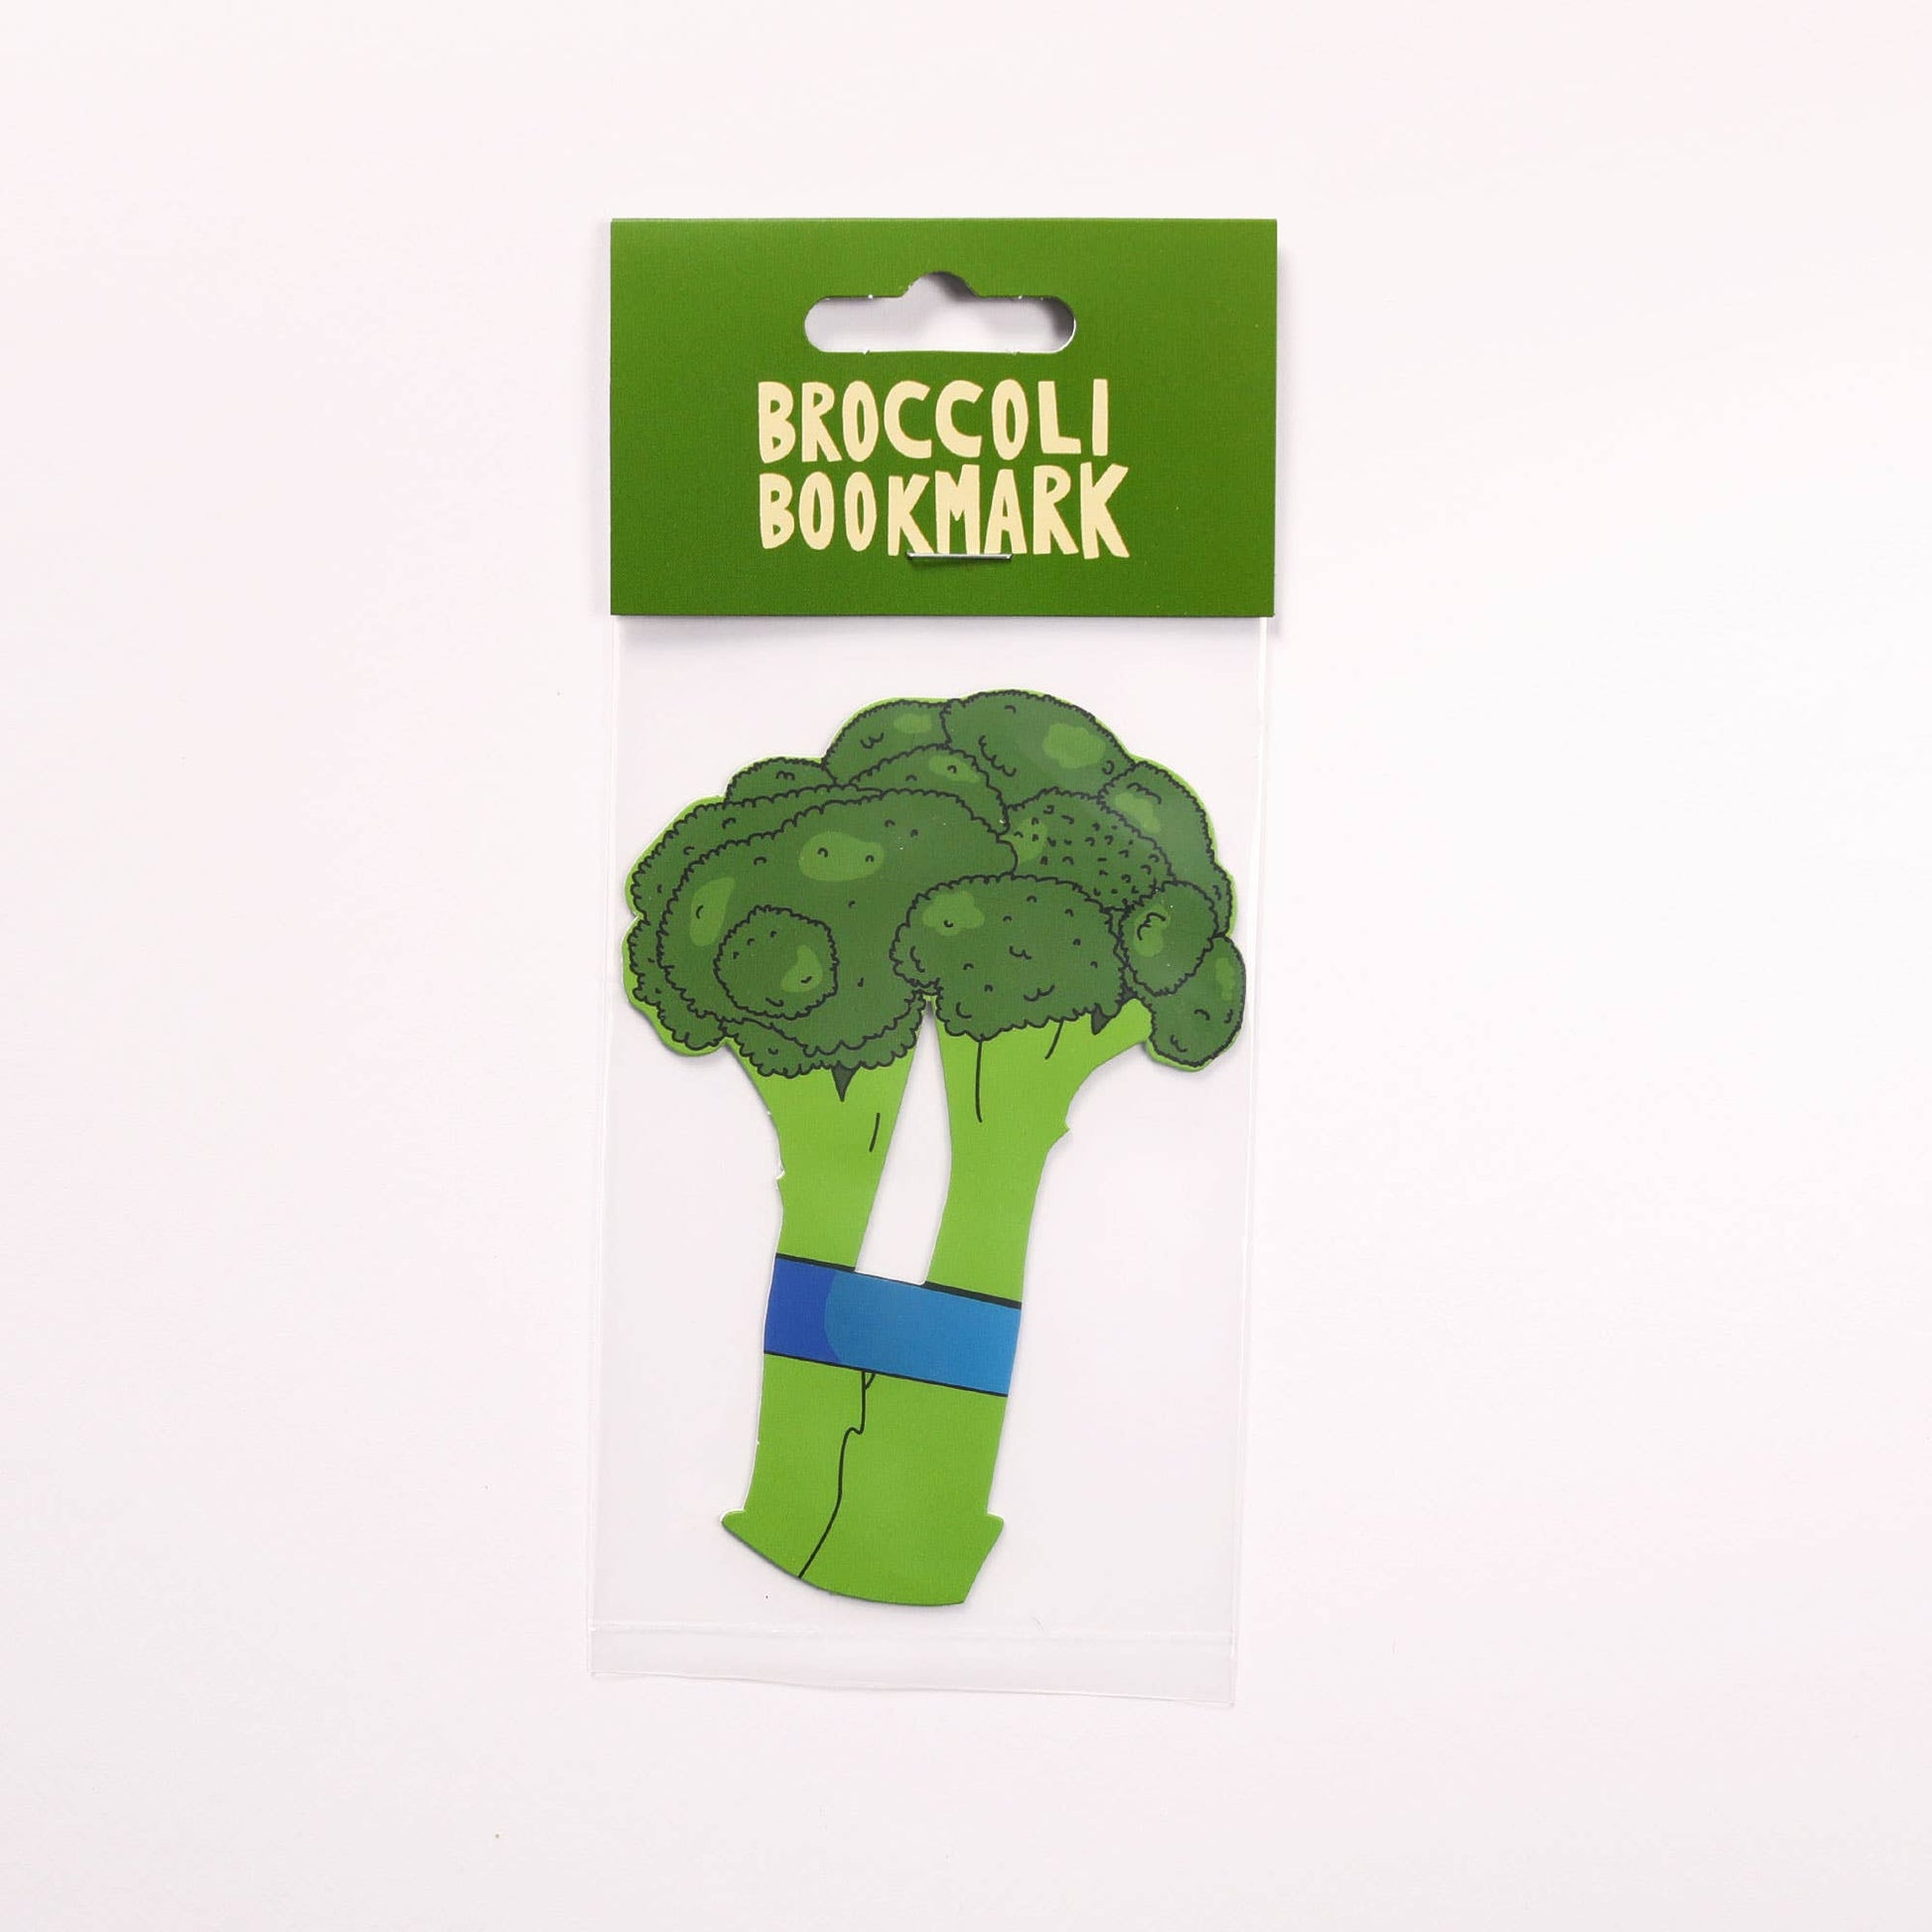 Broccoli bookmark in packaging 